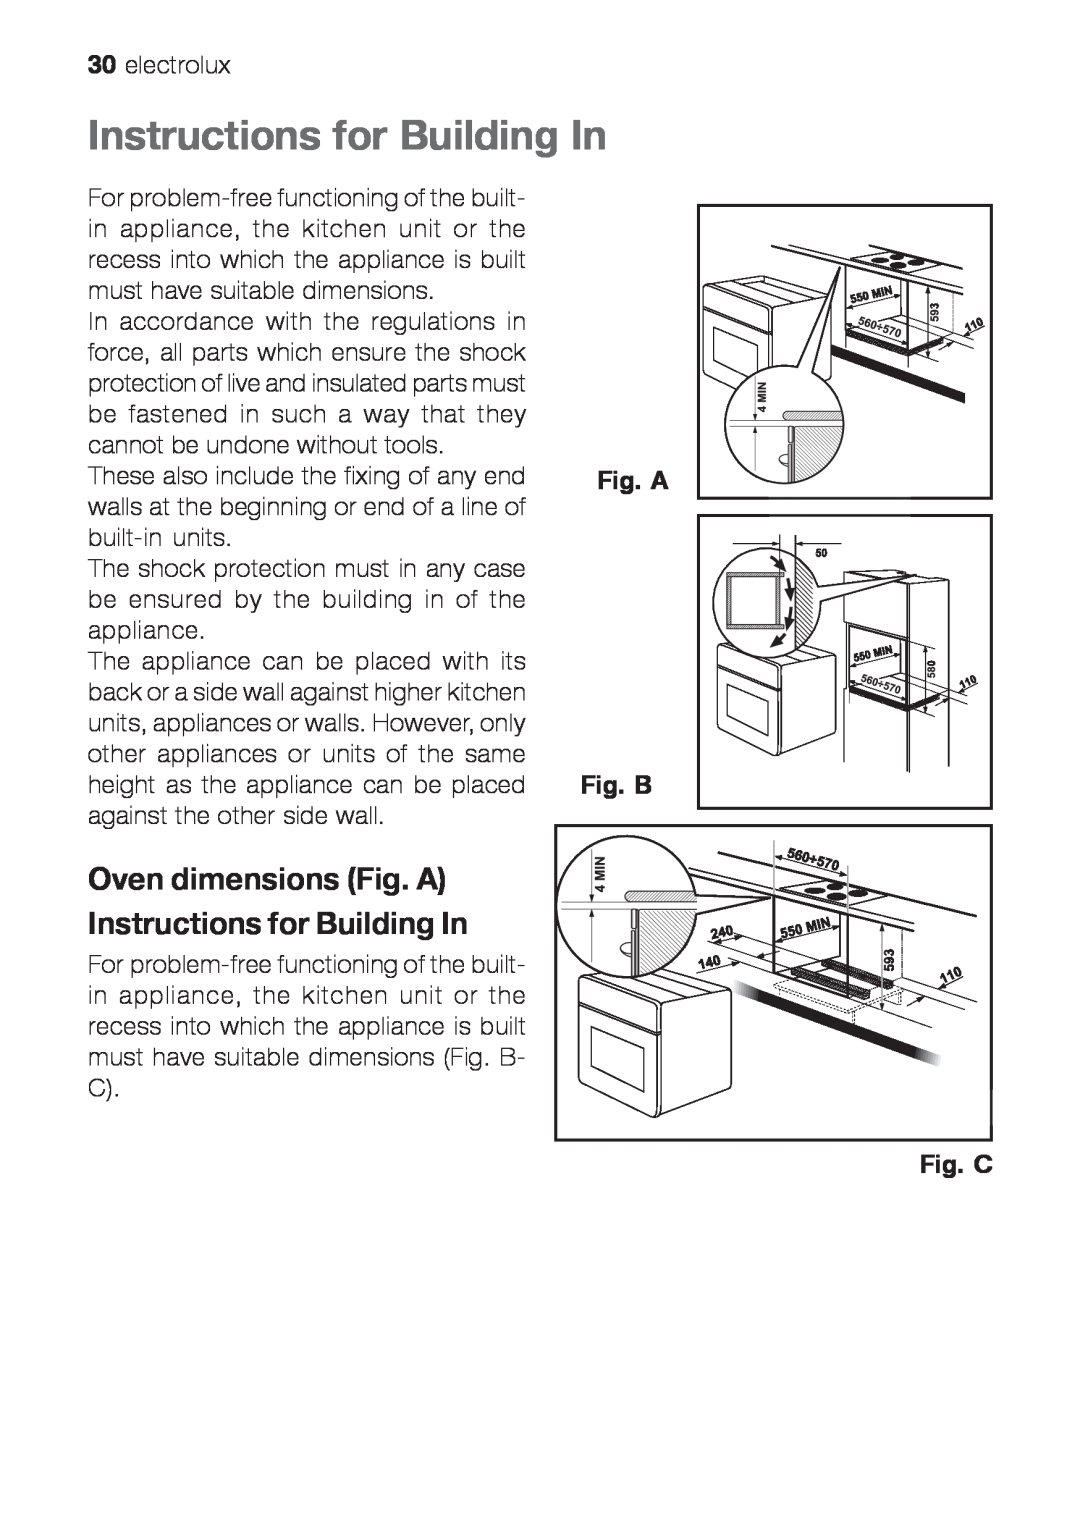 Electrolux EOG 10000 user manual Oven dimensions Fig. A Instructions for Building In, Fig. A Fig. B, Fig. C 